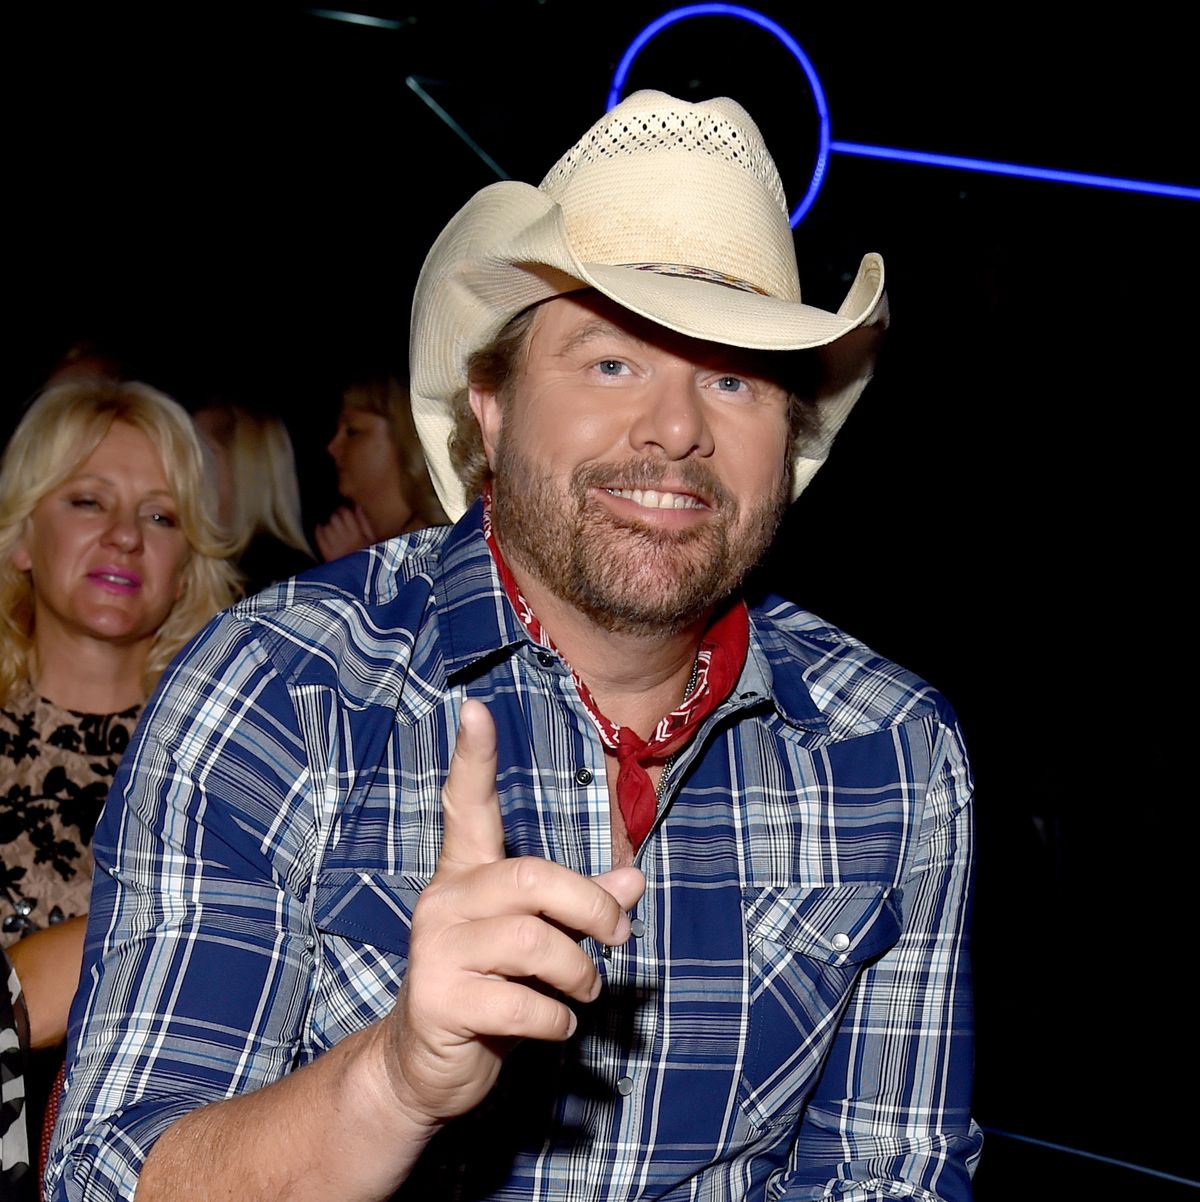 Toby Keith Reveals How He Really Feels About The Current State Of